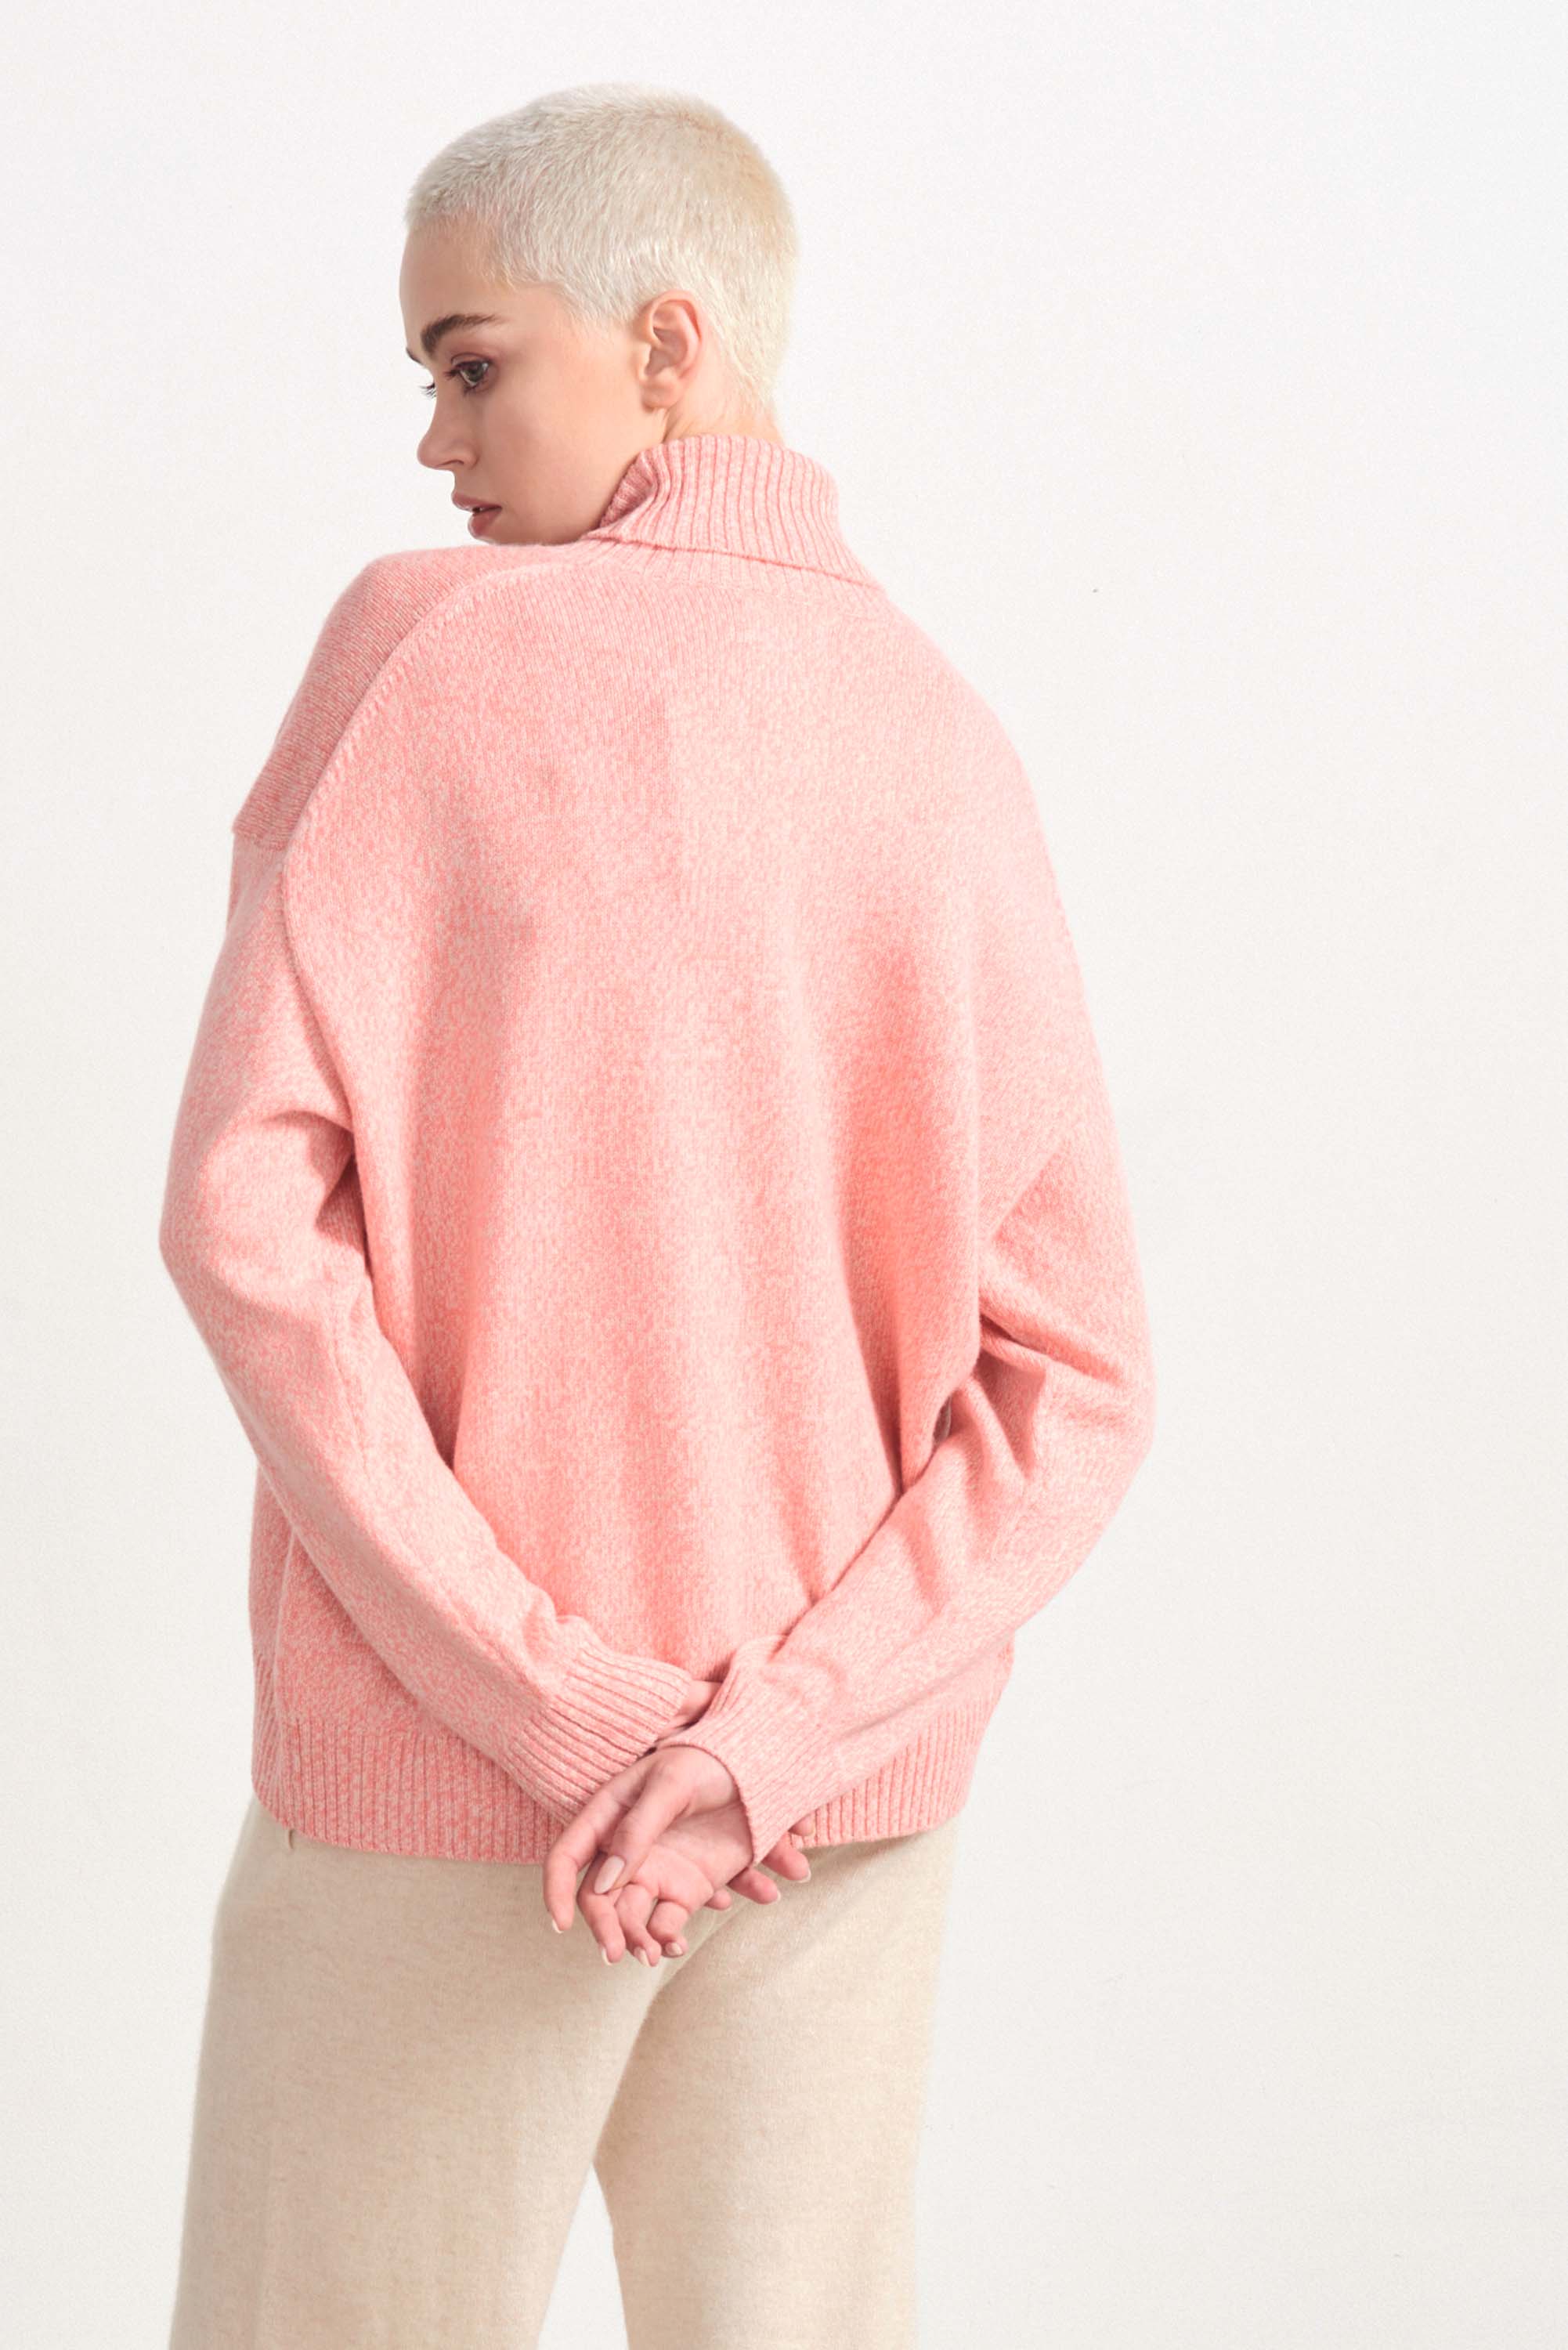 Blonde female model wearing Jumper 1234 cashmere and wool heavier weight oversized roll neck jumper in coral marl facing away from the camera